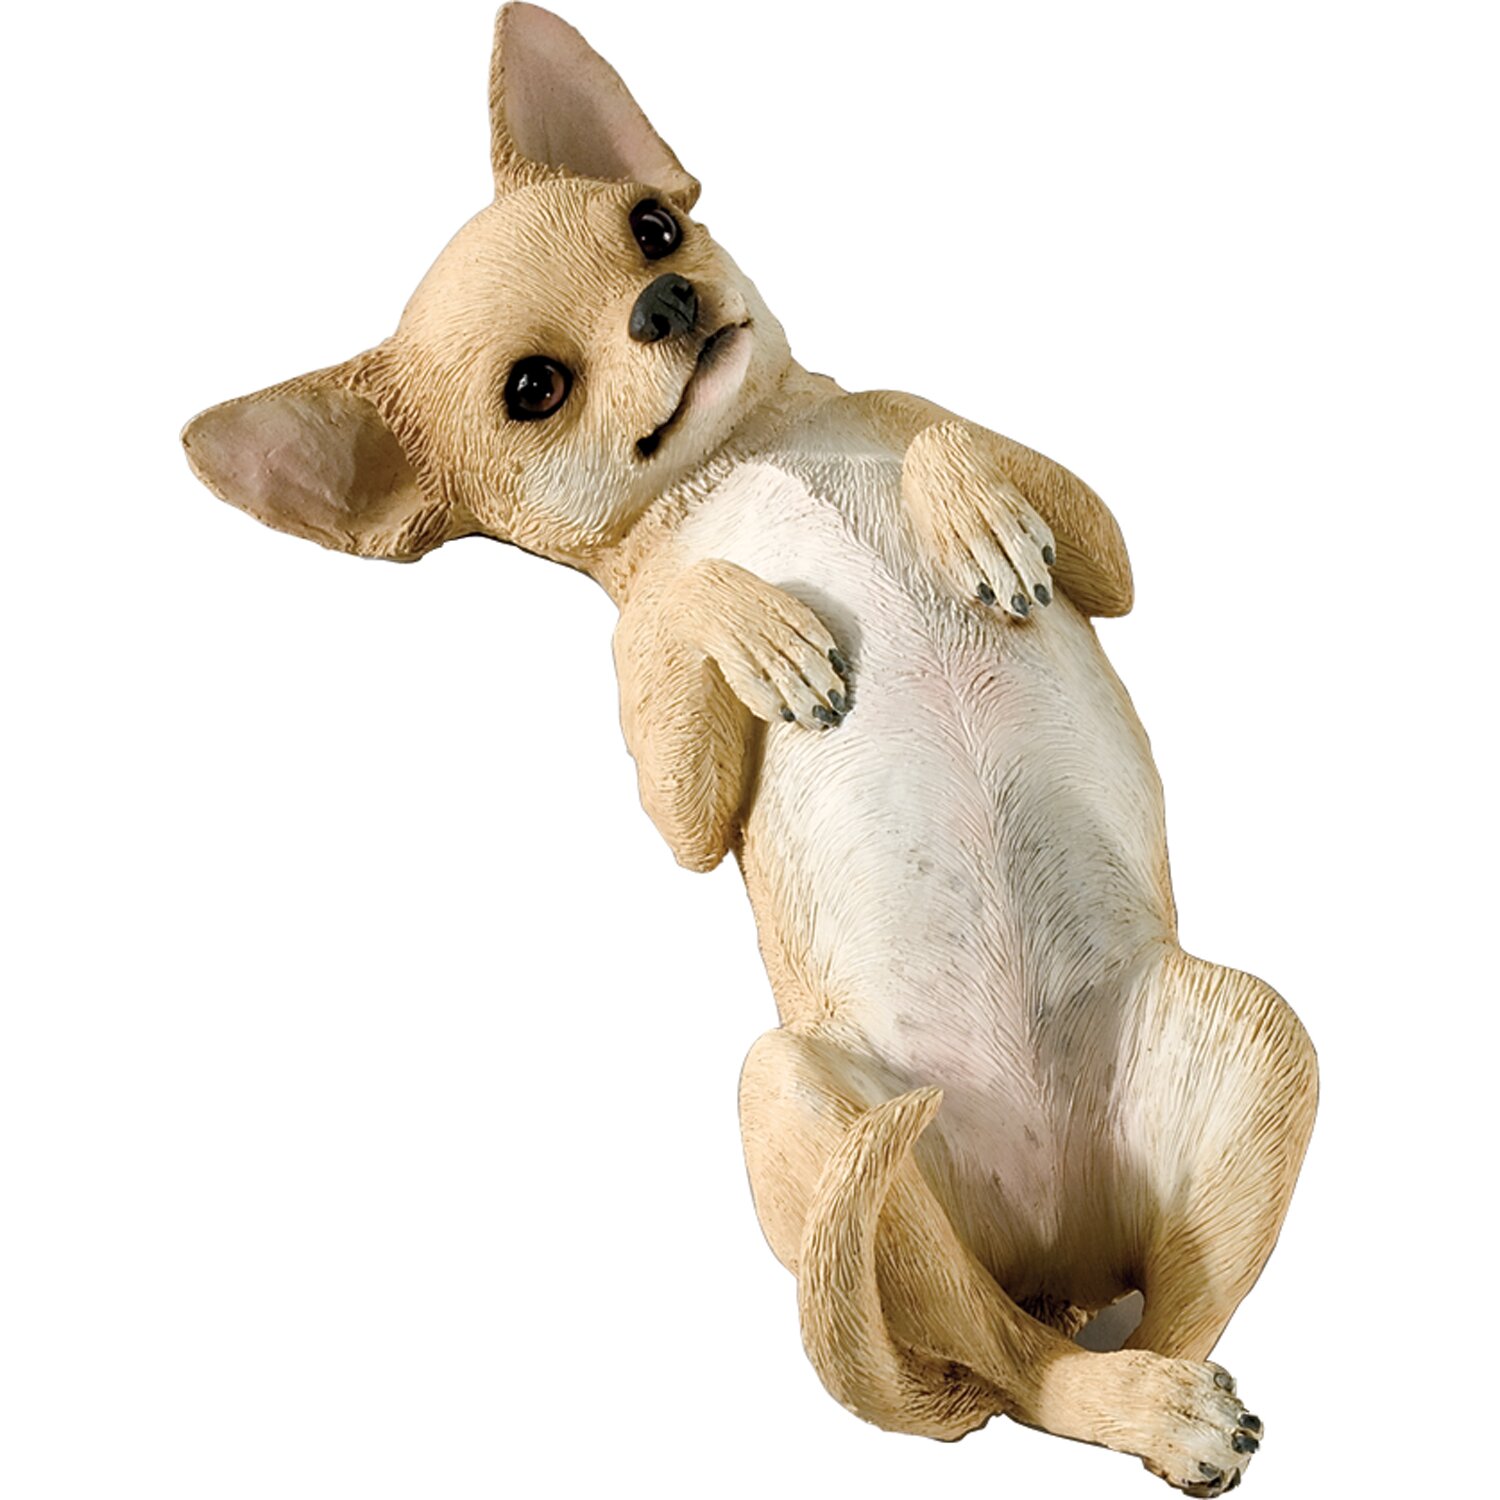 What are the different sizes of Chihuahuas?